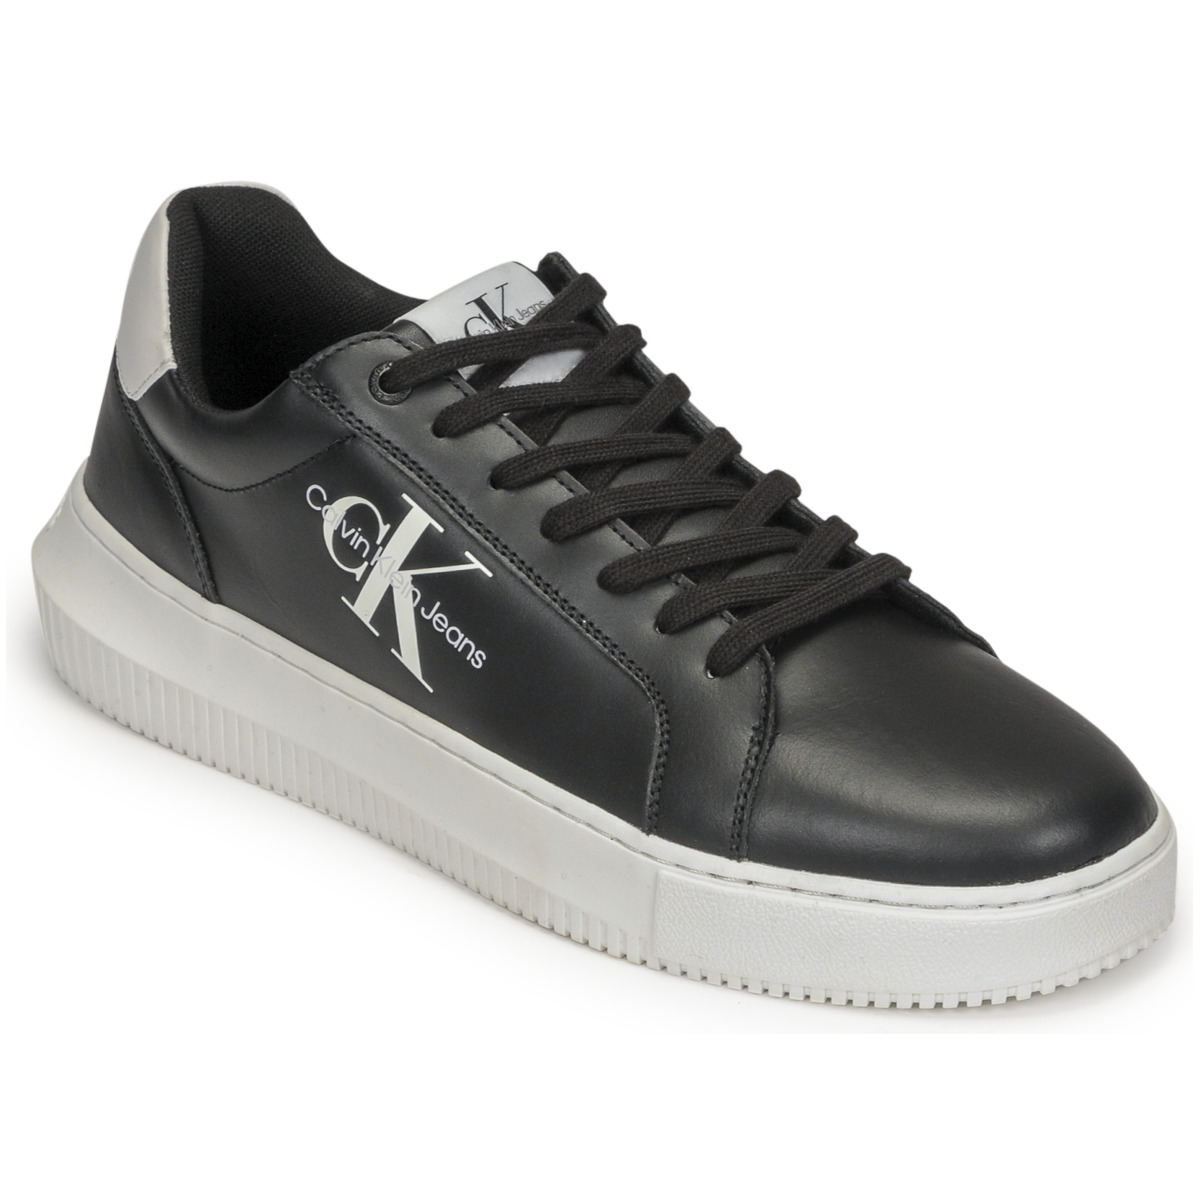 wipe out sex Galaxy Calvin Klein Jeans CHUNKY CUPSOLE MONOLOGO Black / White - Free delivery |  Spartoo NET ! - Shoes Low top trainers Men USD/$141.00